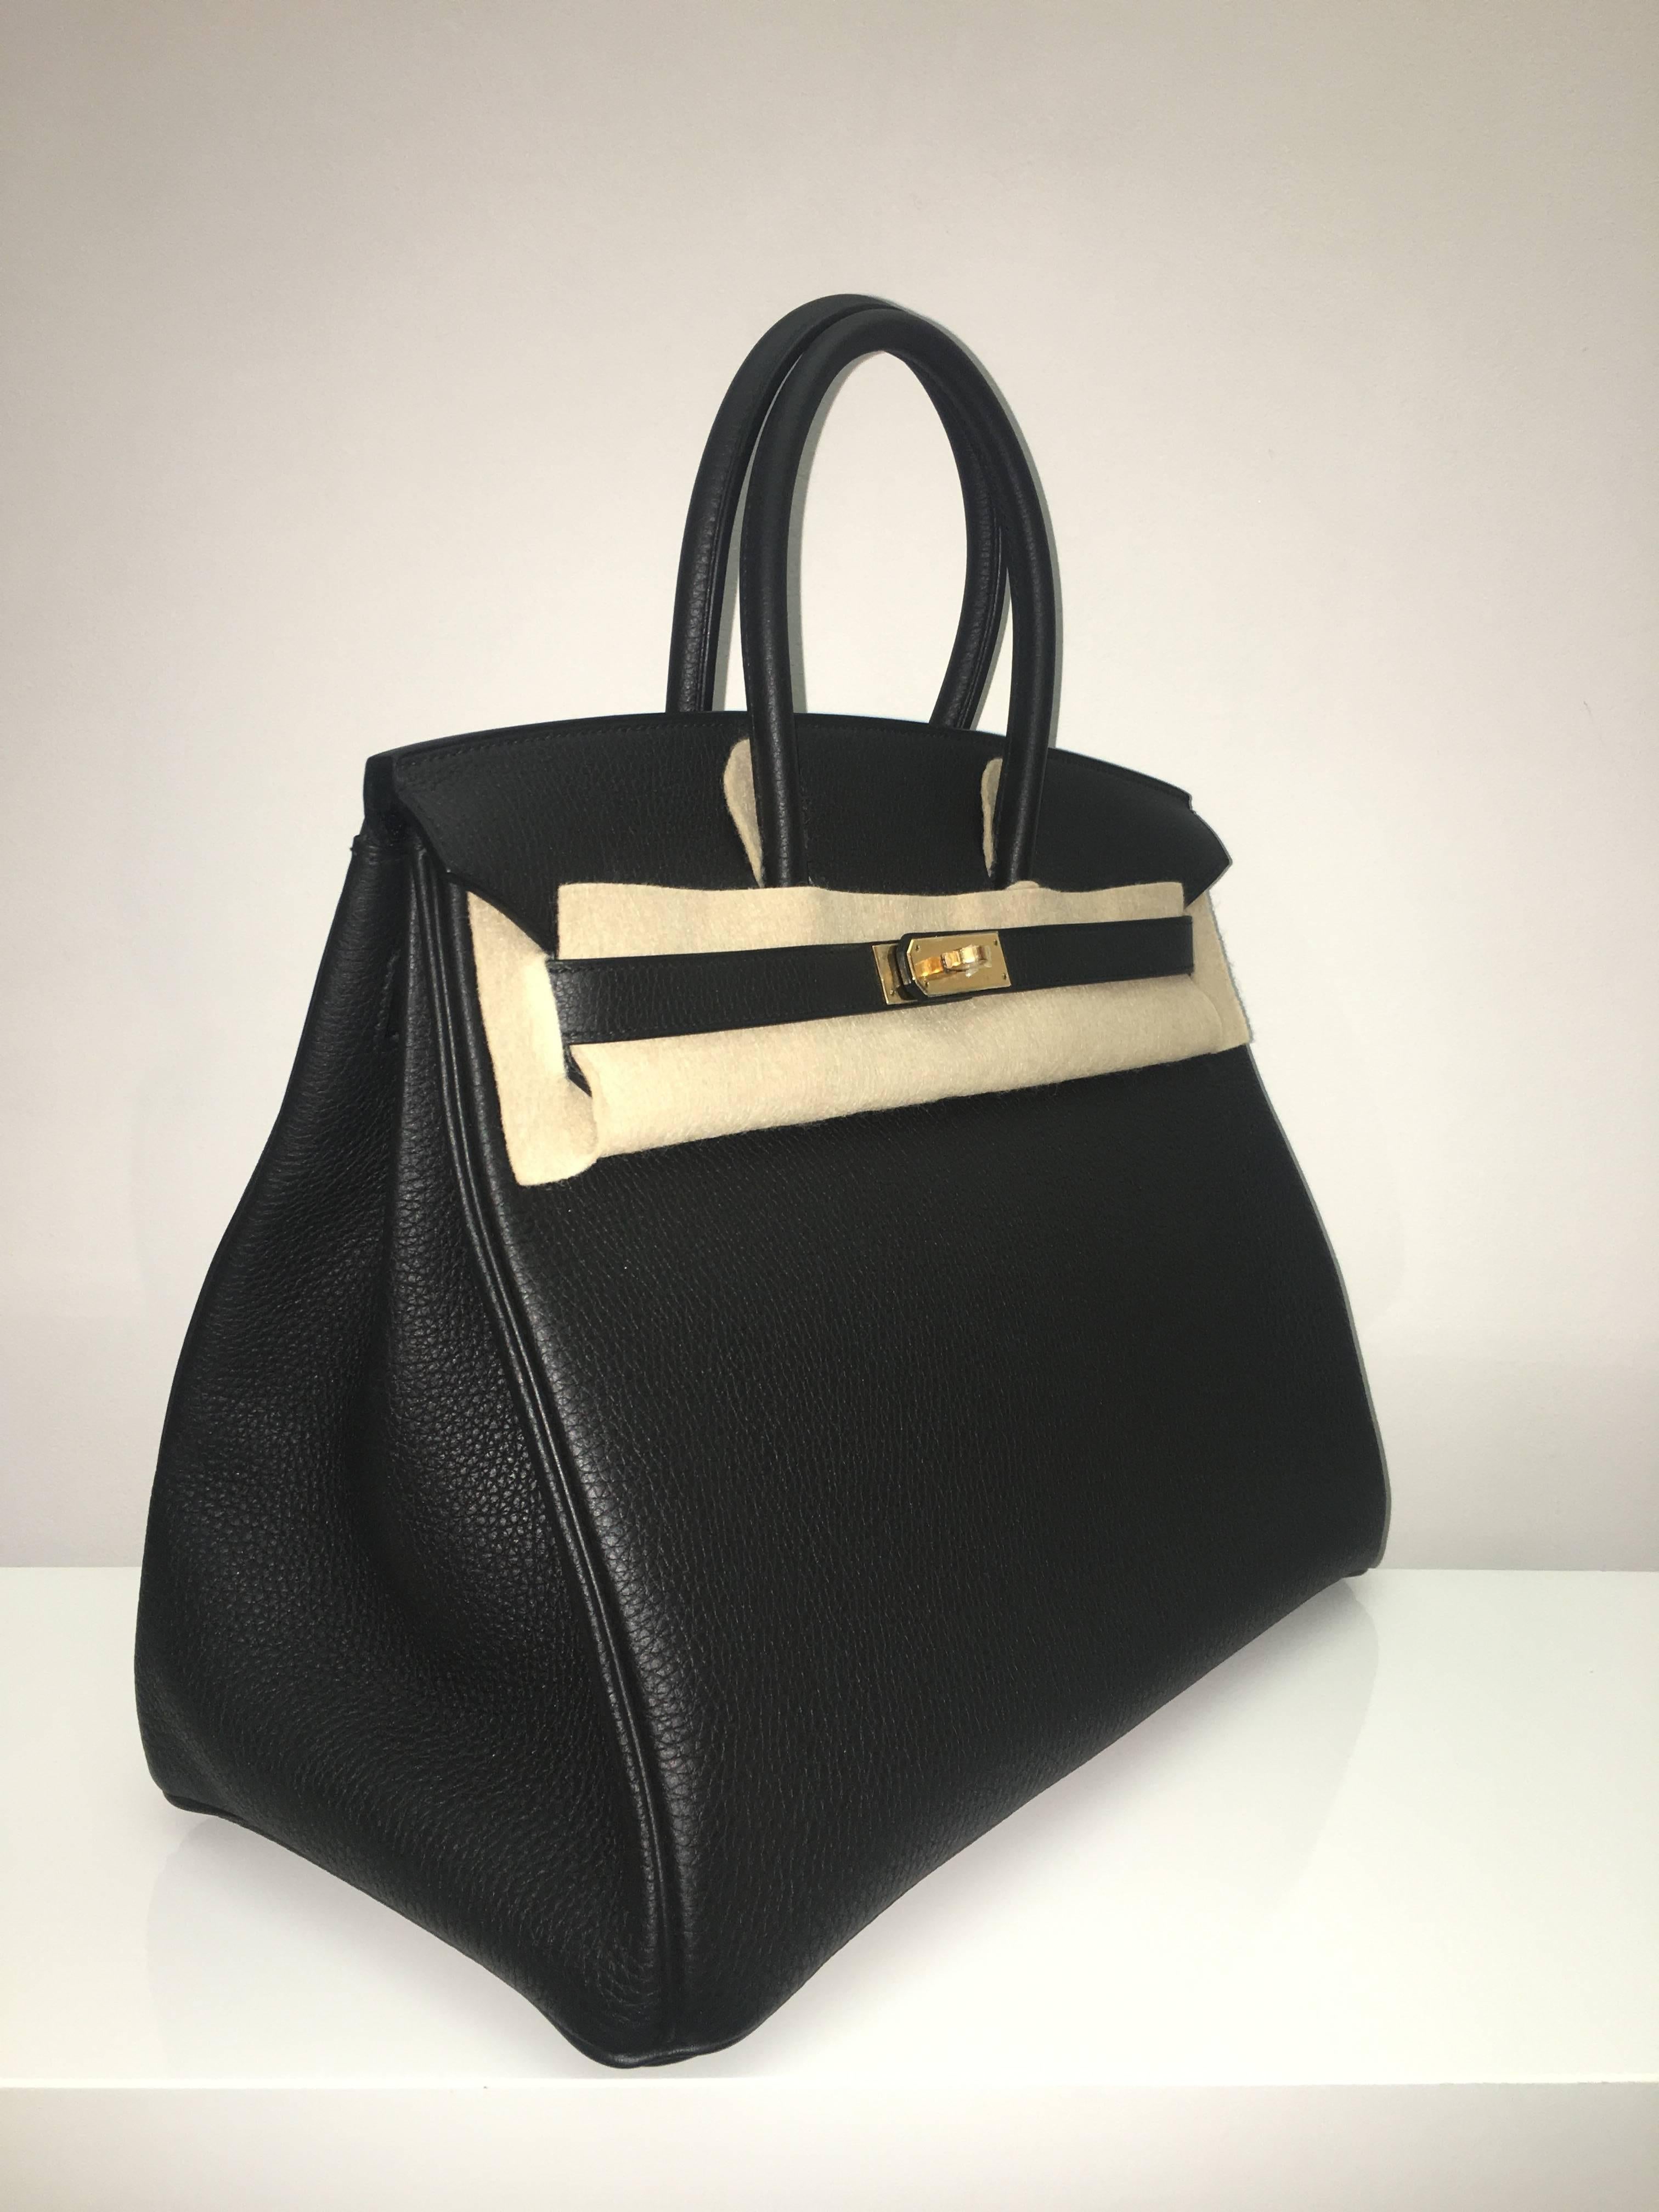 Hermes 
Birkin Size 35
Togo Leather 
Colour Black (Noir)
Gold Hardware 
store fresh, comes with receipt and full set (dust bag, box...) 
Hydeparkfashion specializes in sourcing and delivering authentic luxury handbags, mainly Hermes, to client